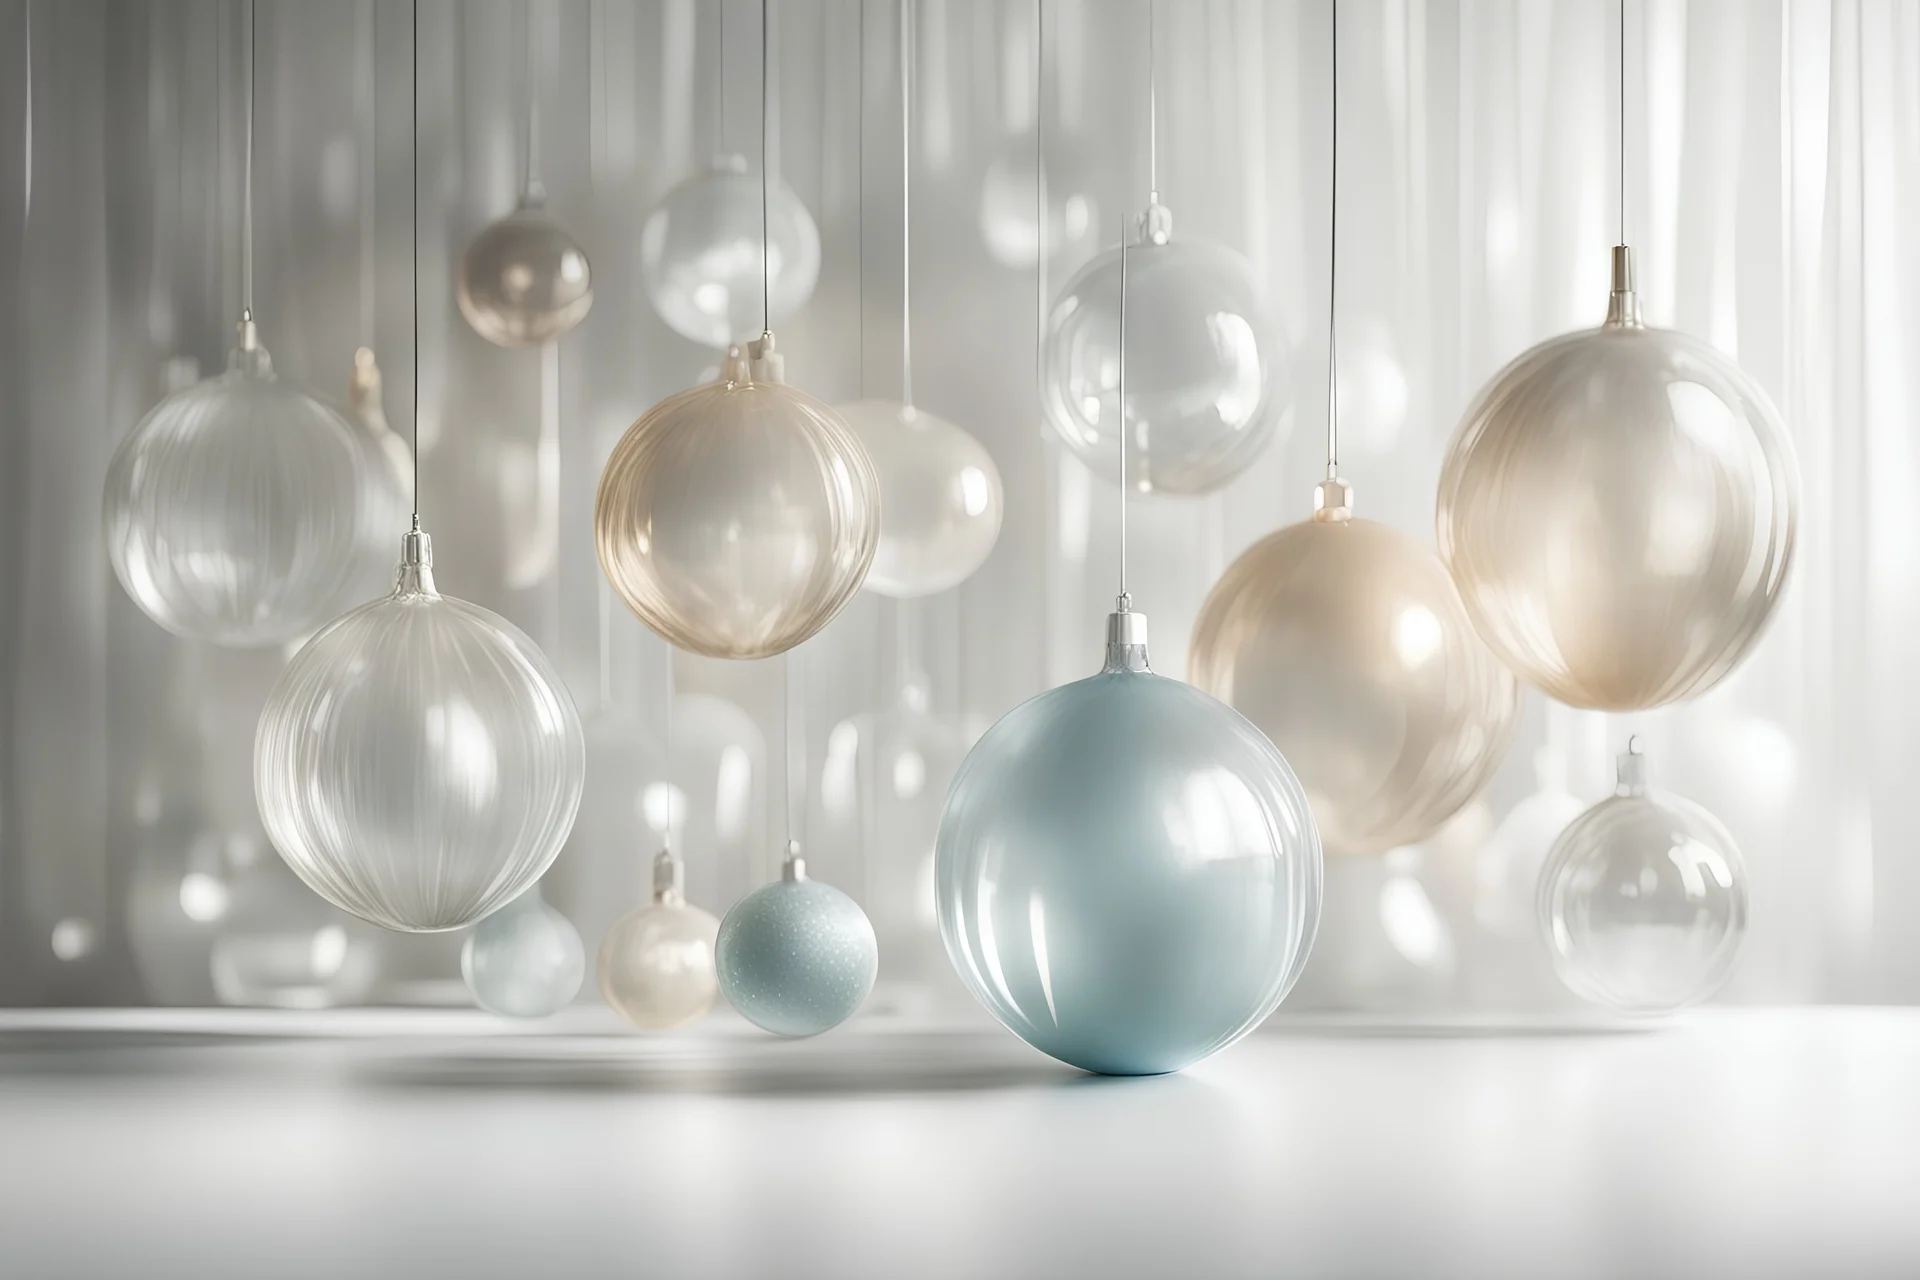 fluted translucent glass ornaments of varying shapes floating in front of a soft blurry light and shadow backdrop wall